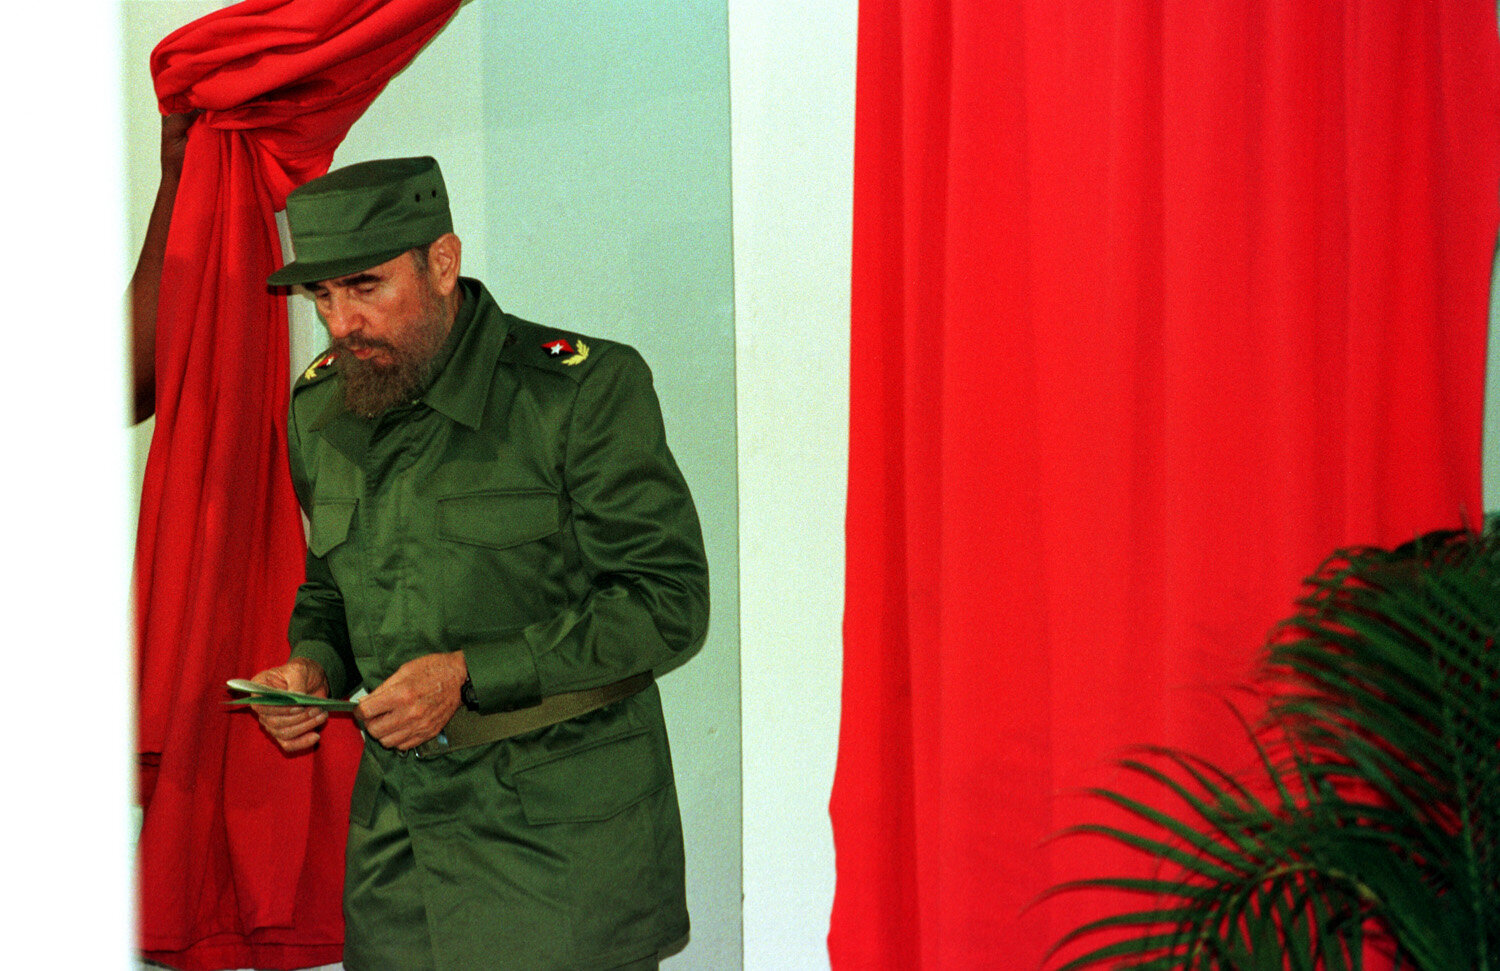  Fidel Castro cast his vote for the national assembly in El Cobre, 1998                      